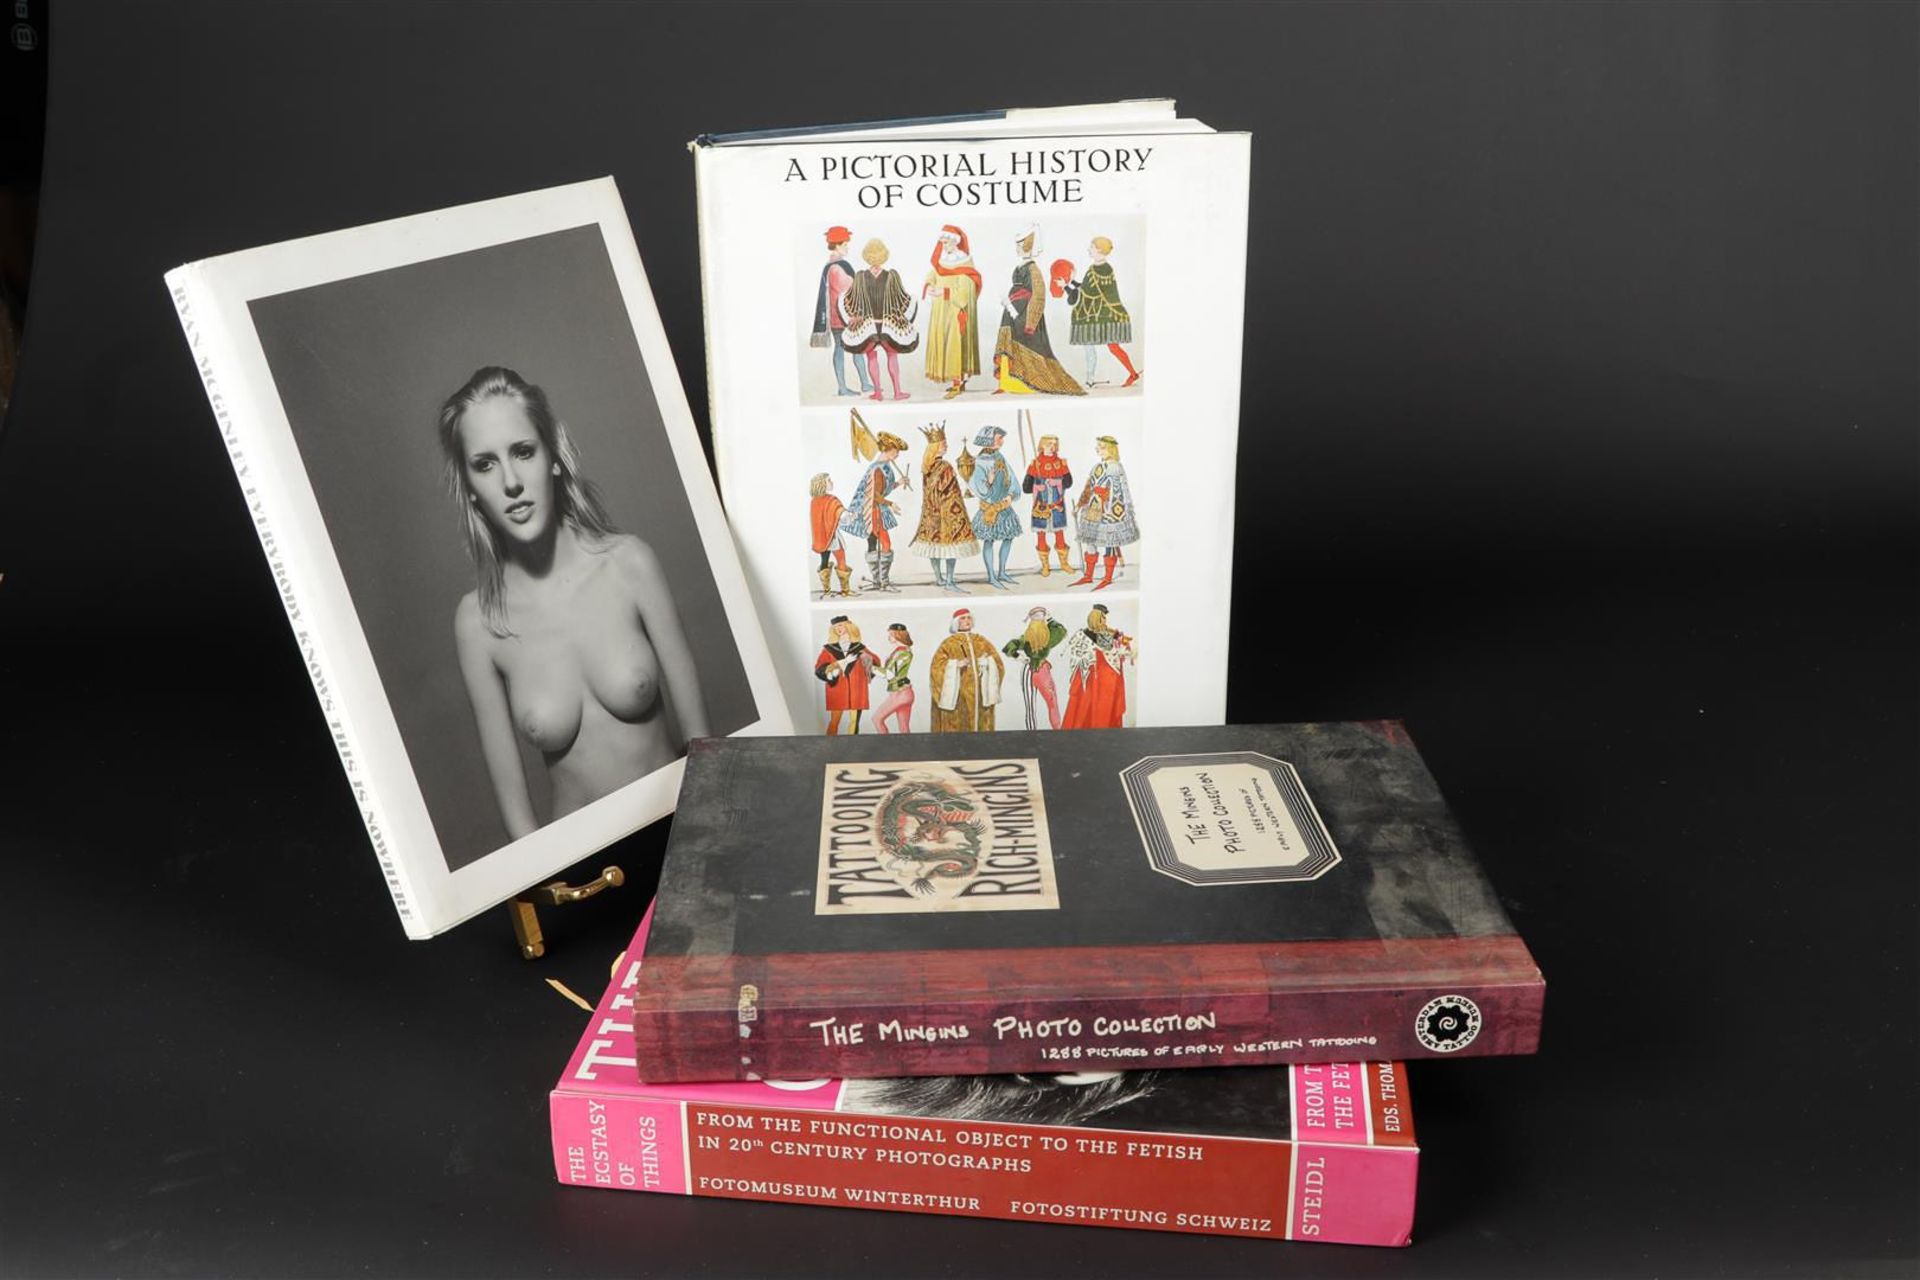 Collection of books including The Mingins Photo Collection: 1288 Pictures of Early Western Tattooing